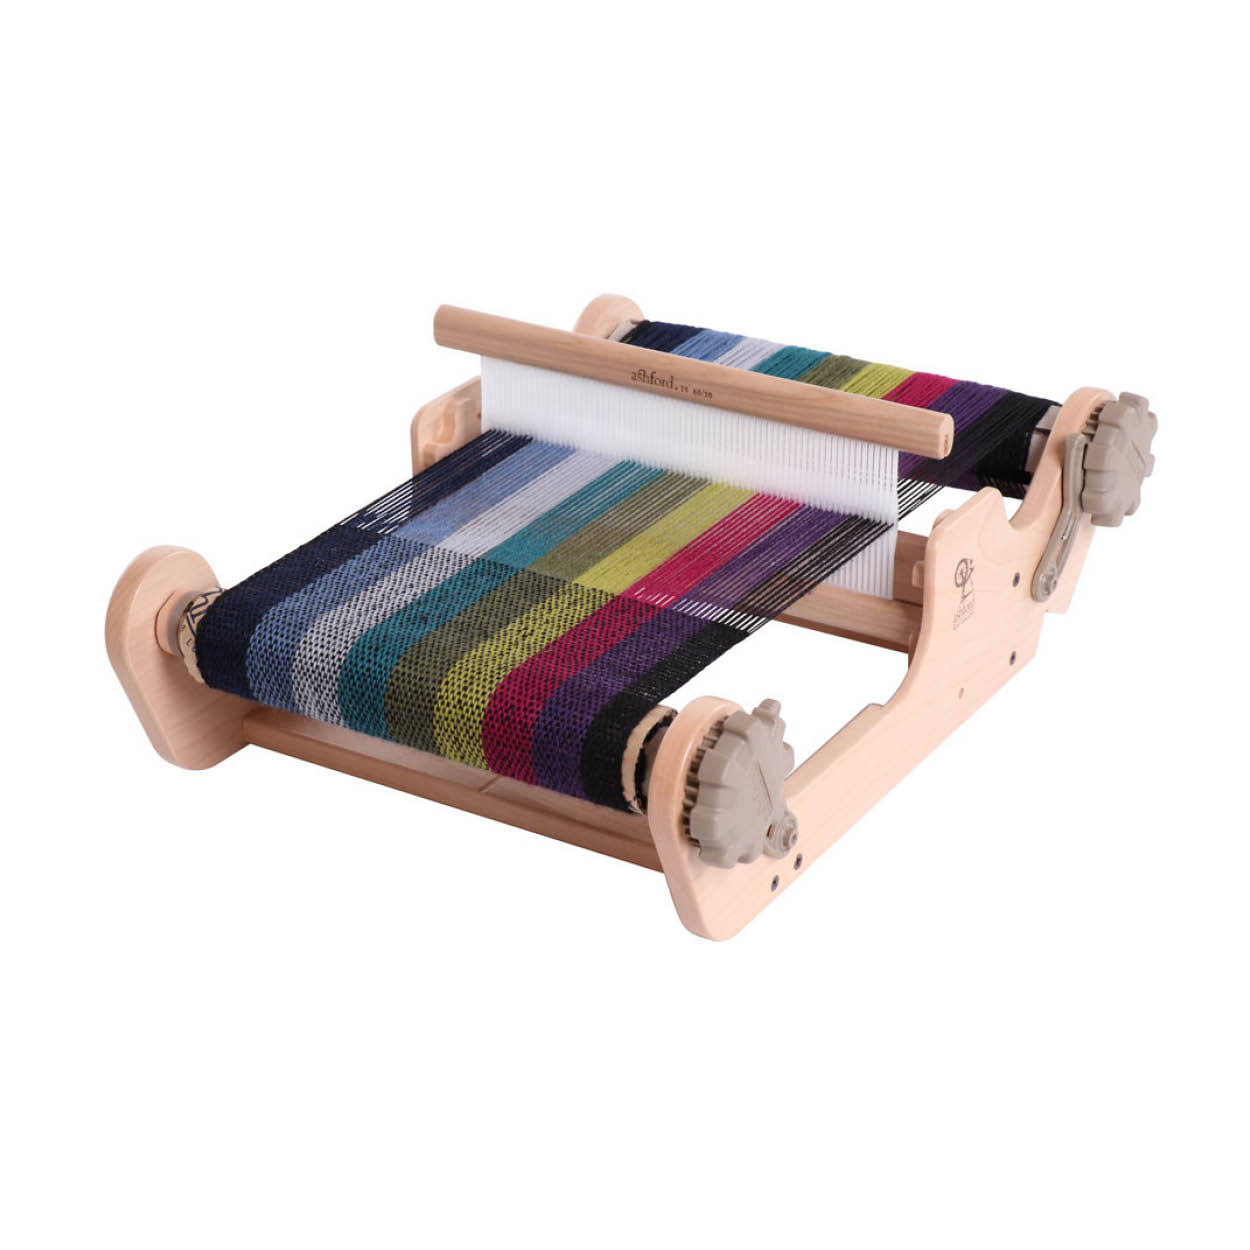 25cm SampleIt Loom with Built-in Second Heddle Kit